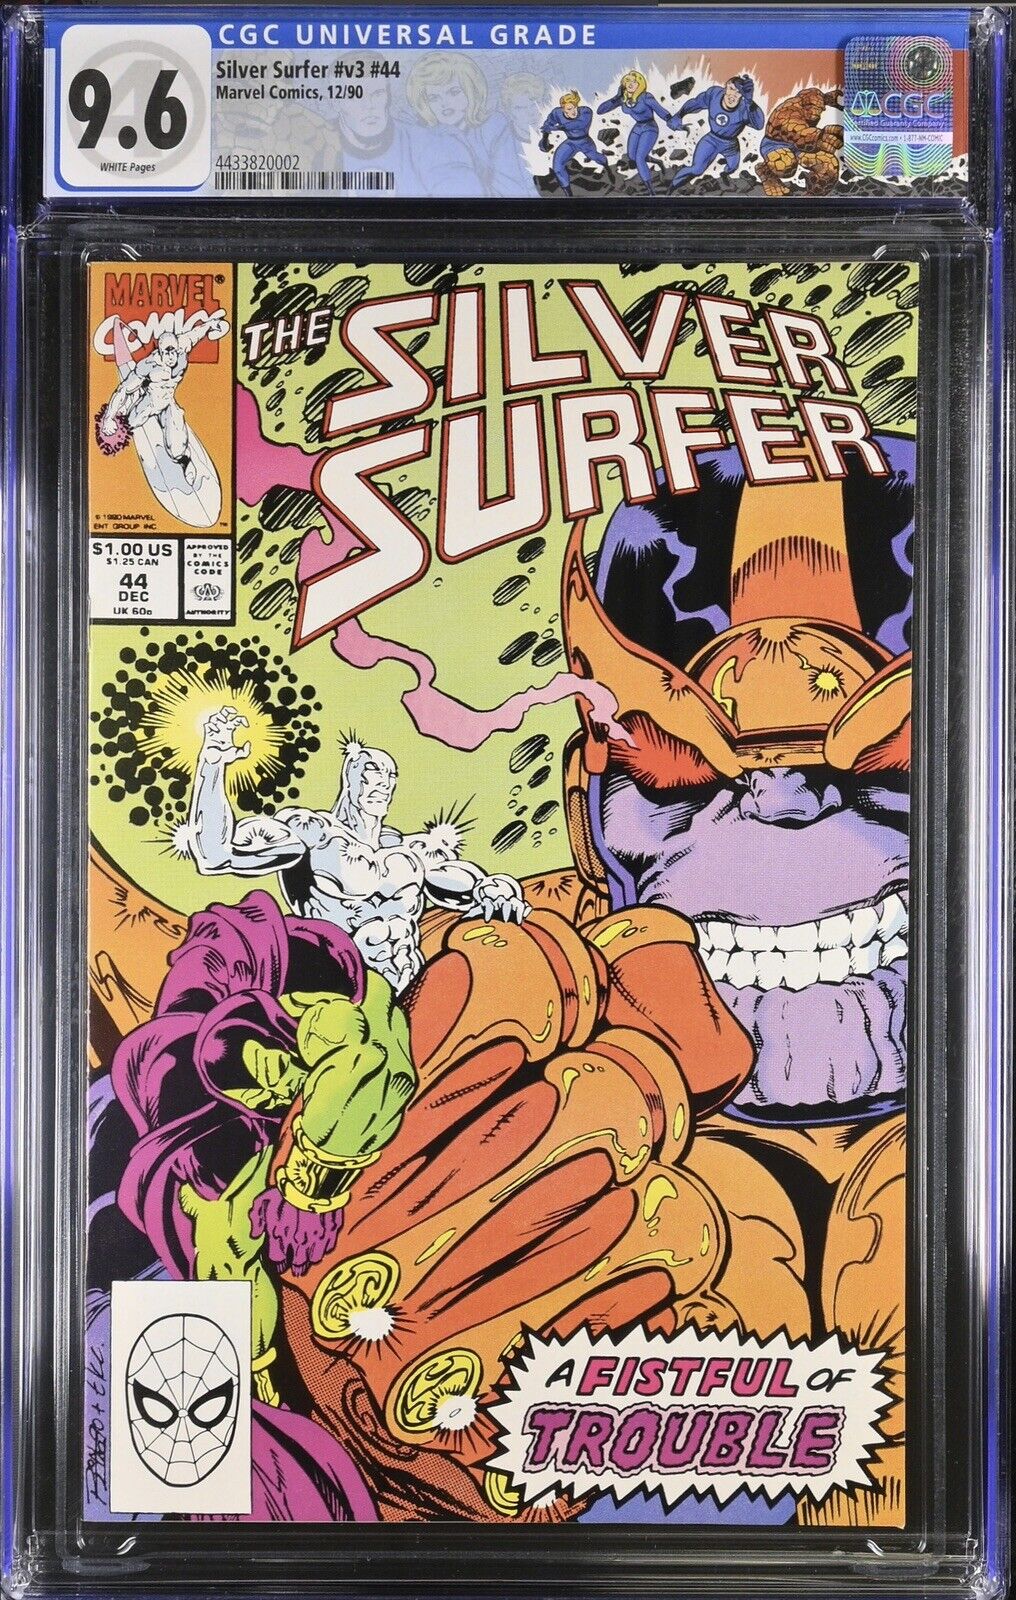 SILVER SURFER #44 (1990) CGC 9.6 NM+ 1st App Infinity Gauntlet with Insert